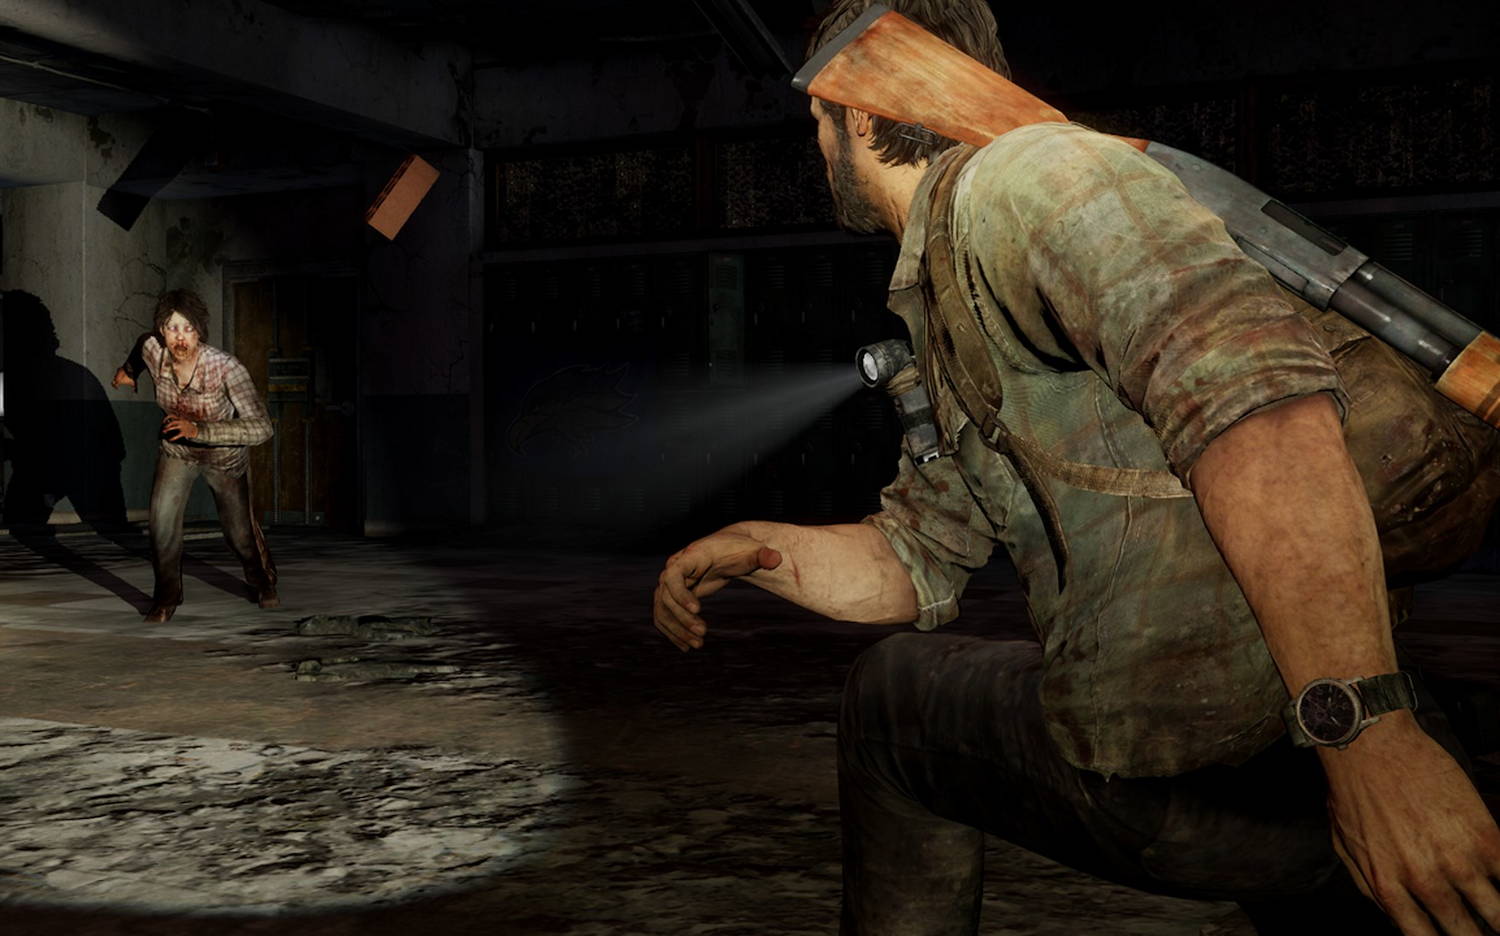 Joel from the Last Of Us game, reaching for a ginger schnapps molotov cocktail to defend himself.